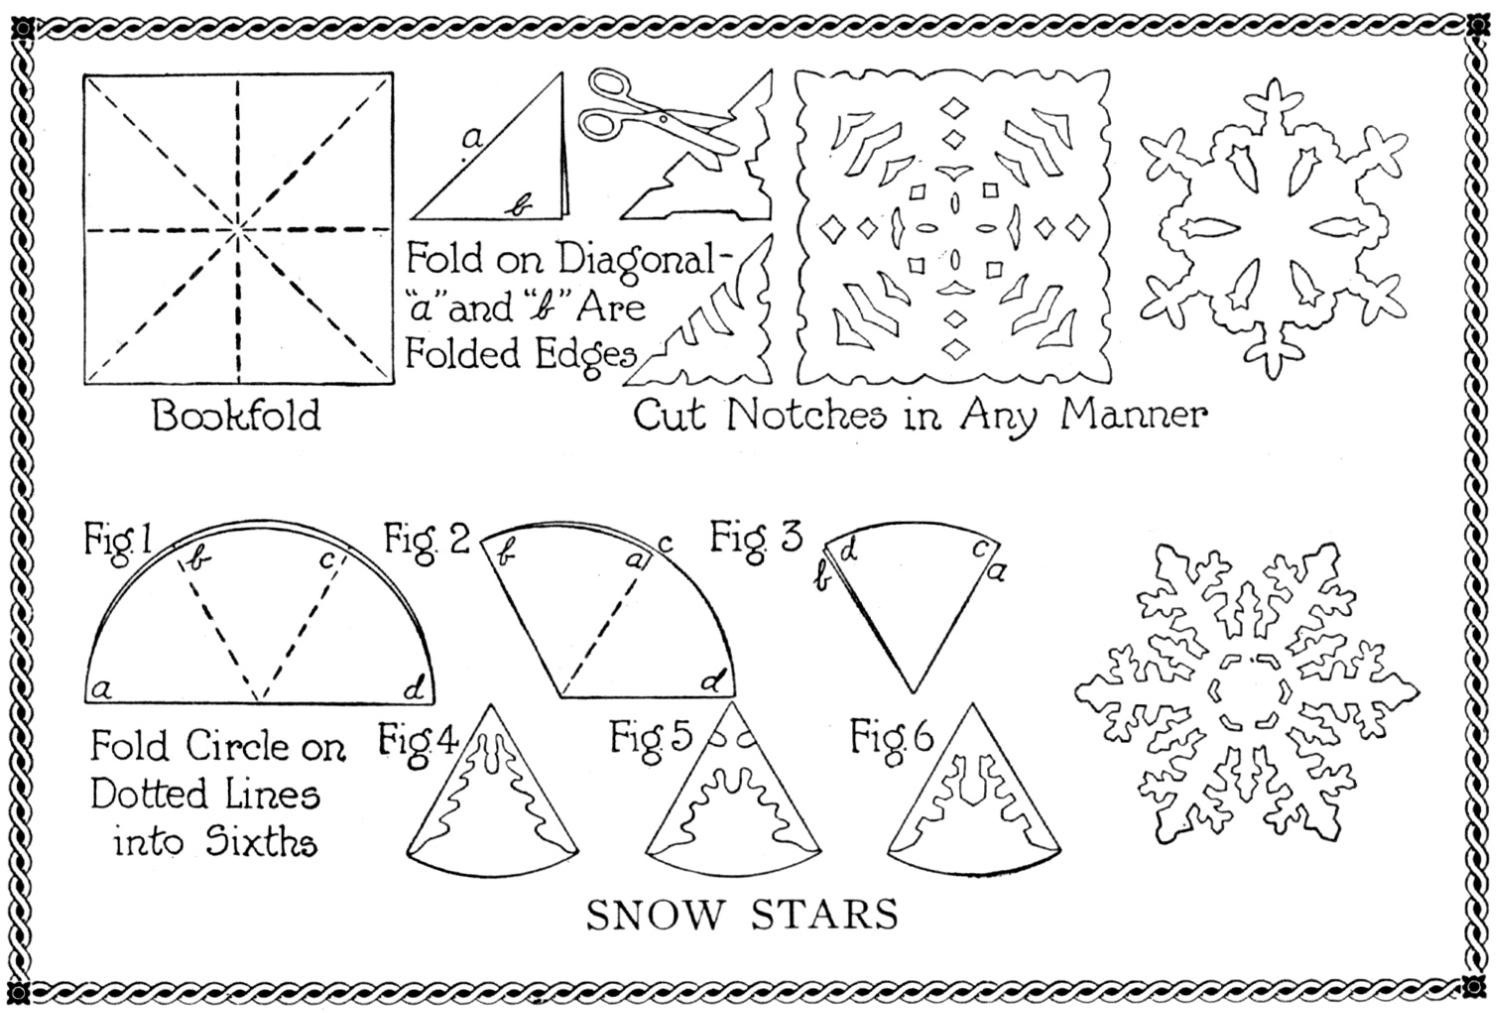 Paper Embroidery Patterns Free Paper Embroidery Patterns And Instructions